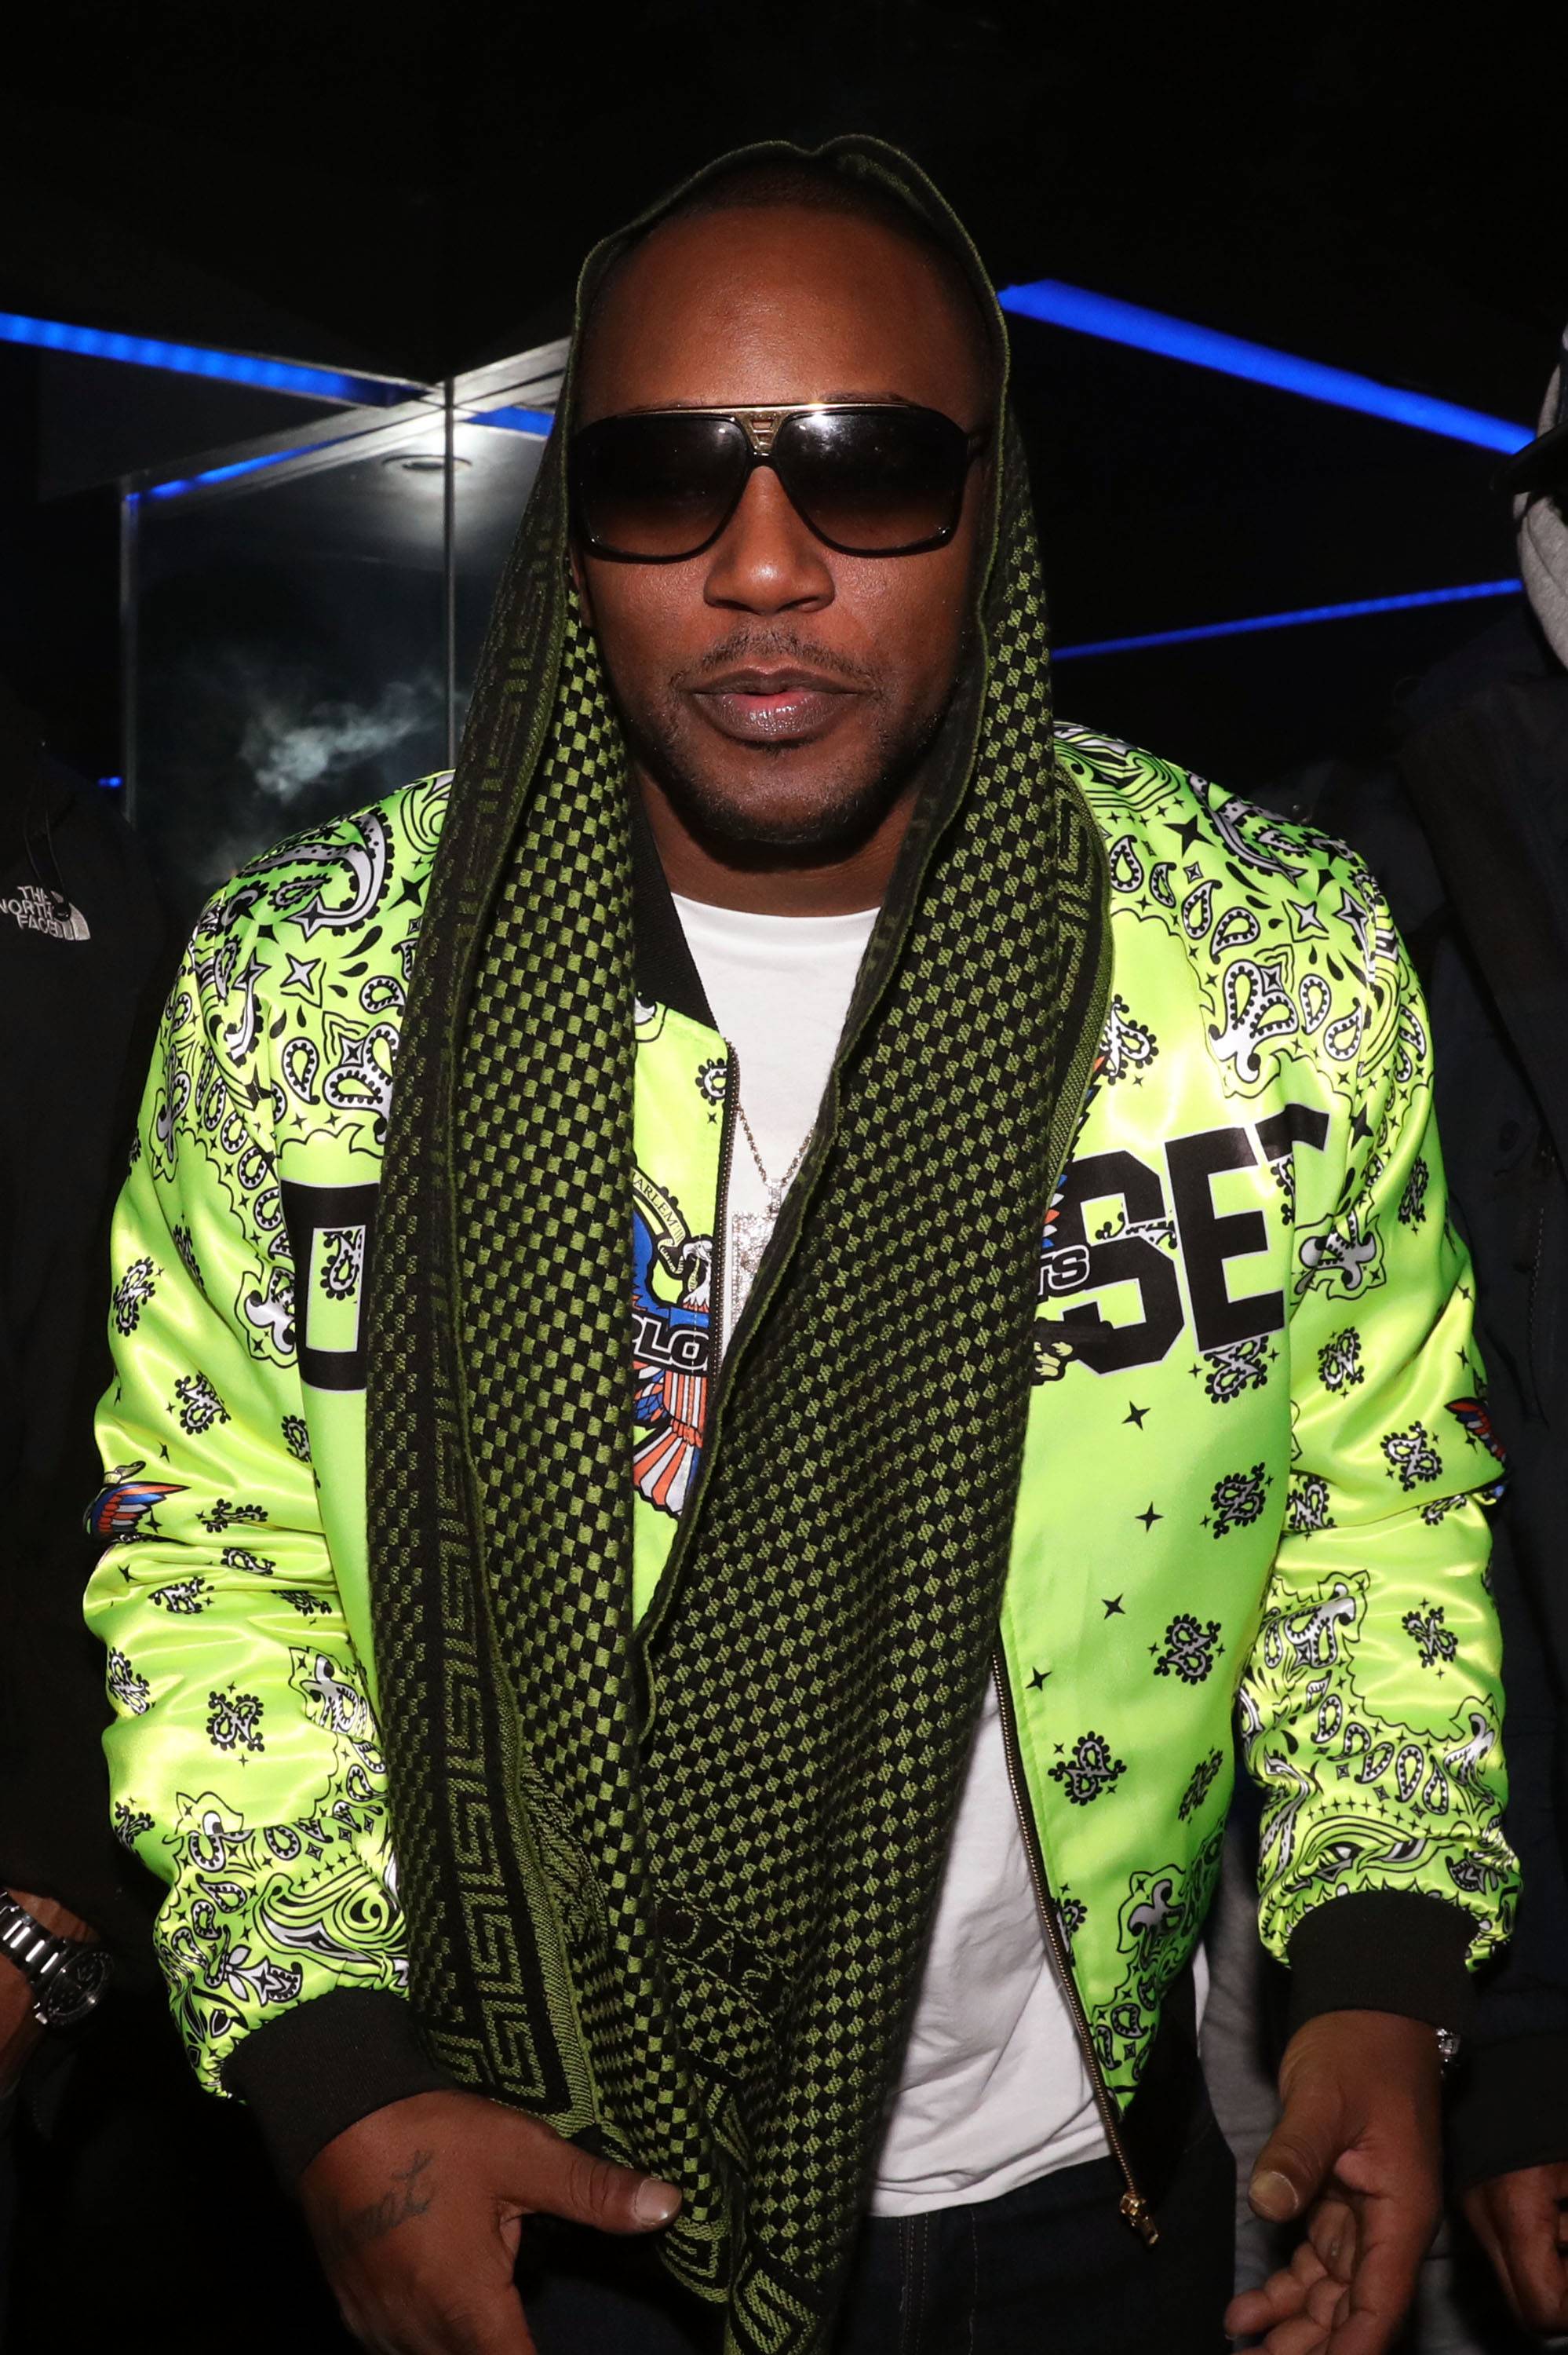 NEW YORK, NY - MARCH 12:  Cam'ron attends "Harlem World" The Concert at S.O.B.'s on March 12, 2019 in New York City.  (Photo by Johnny Nunez/WireImage)